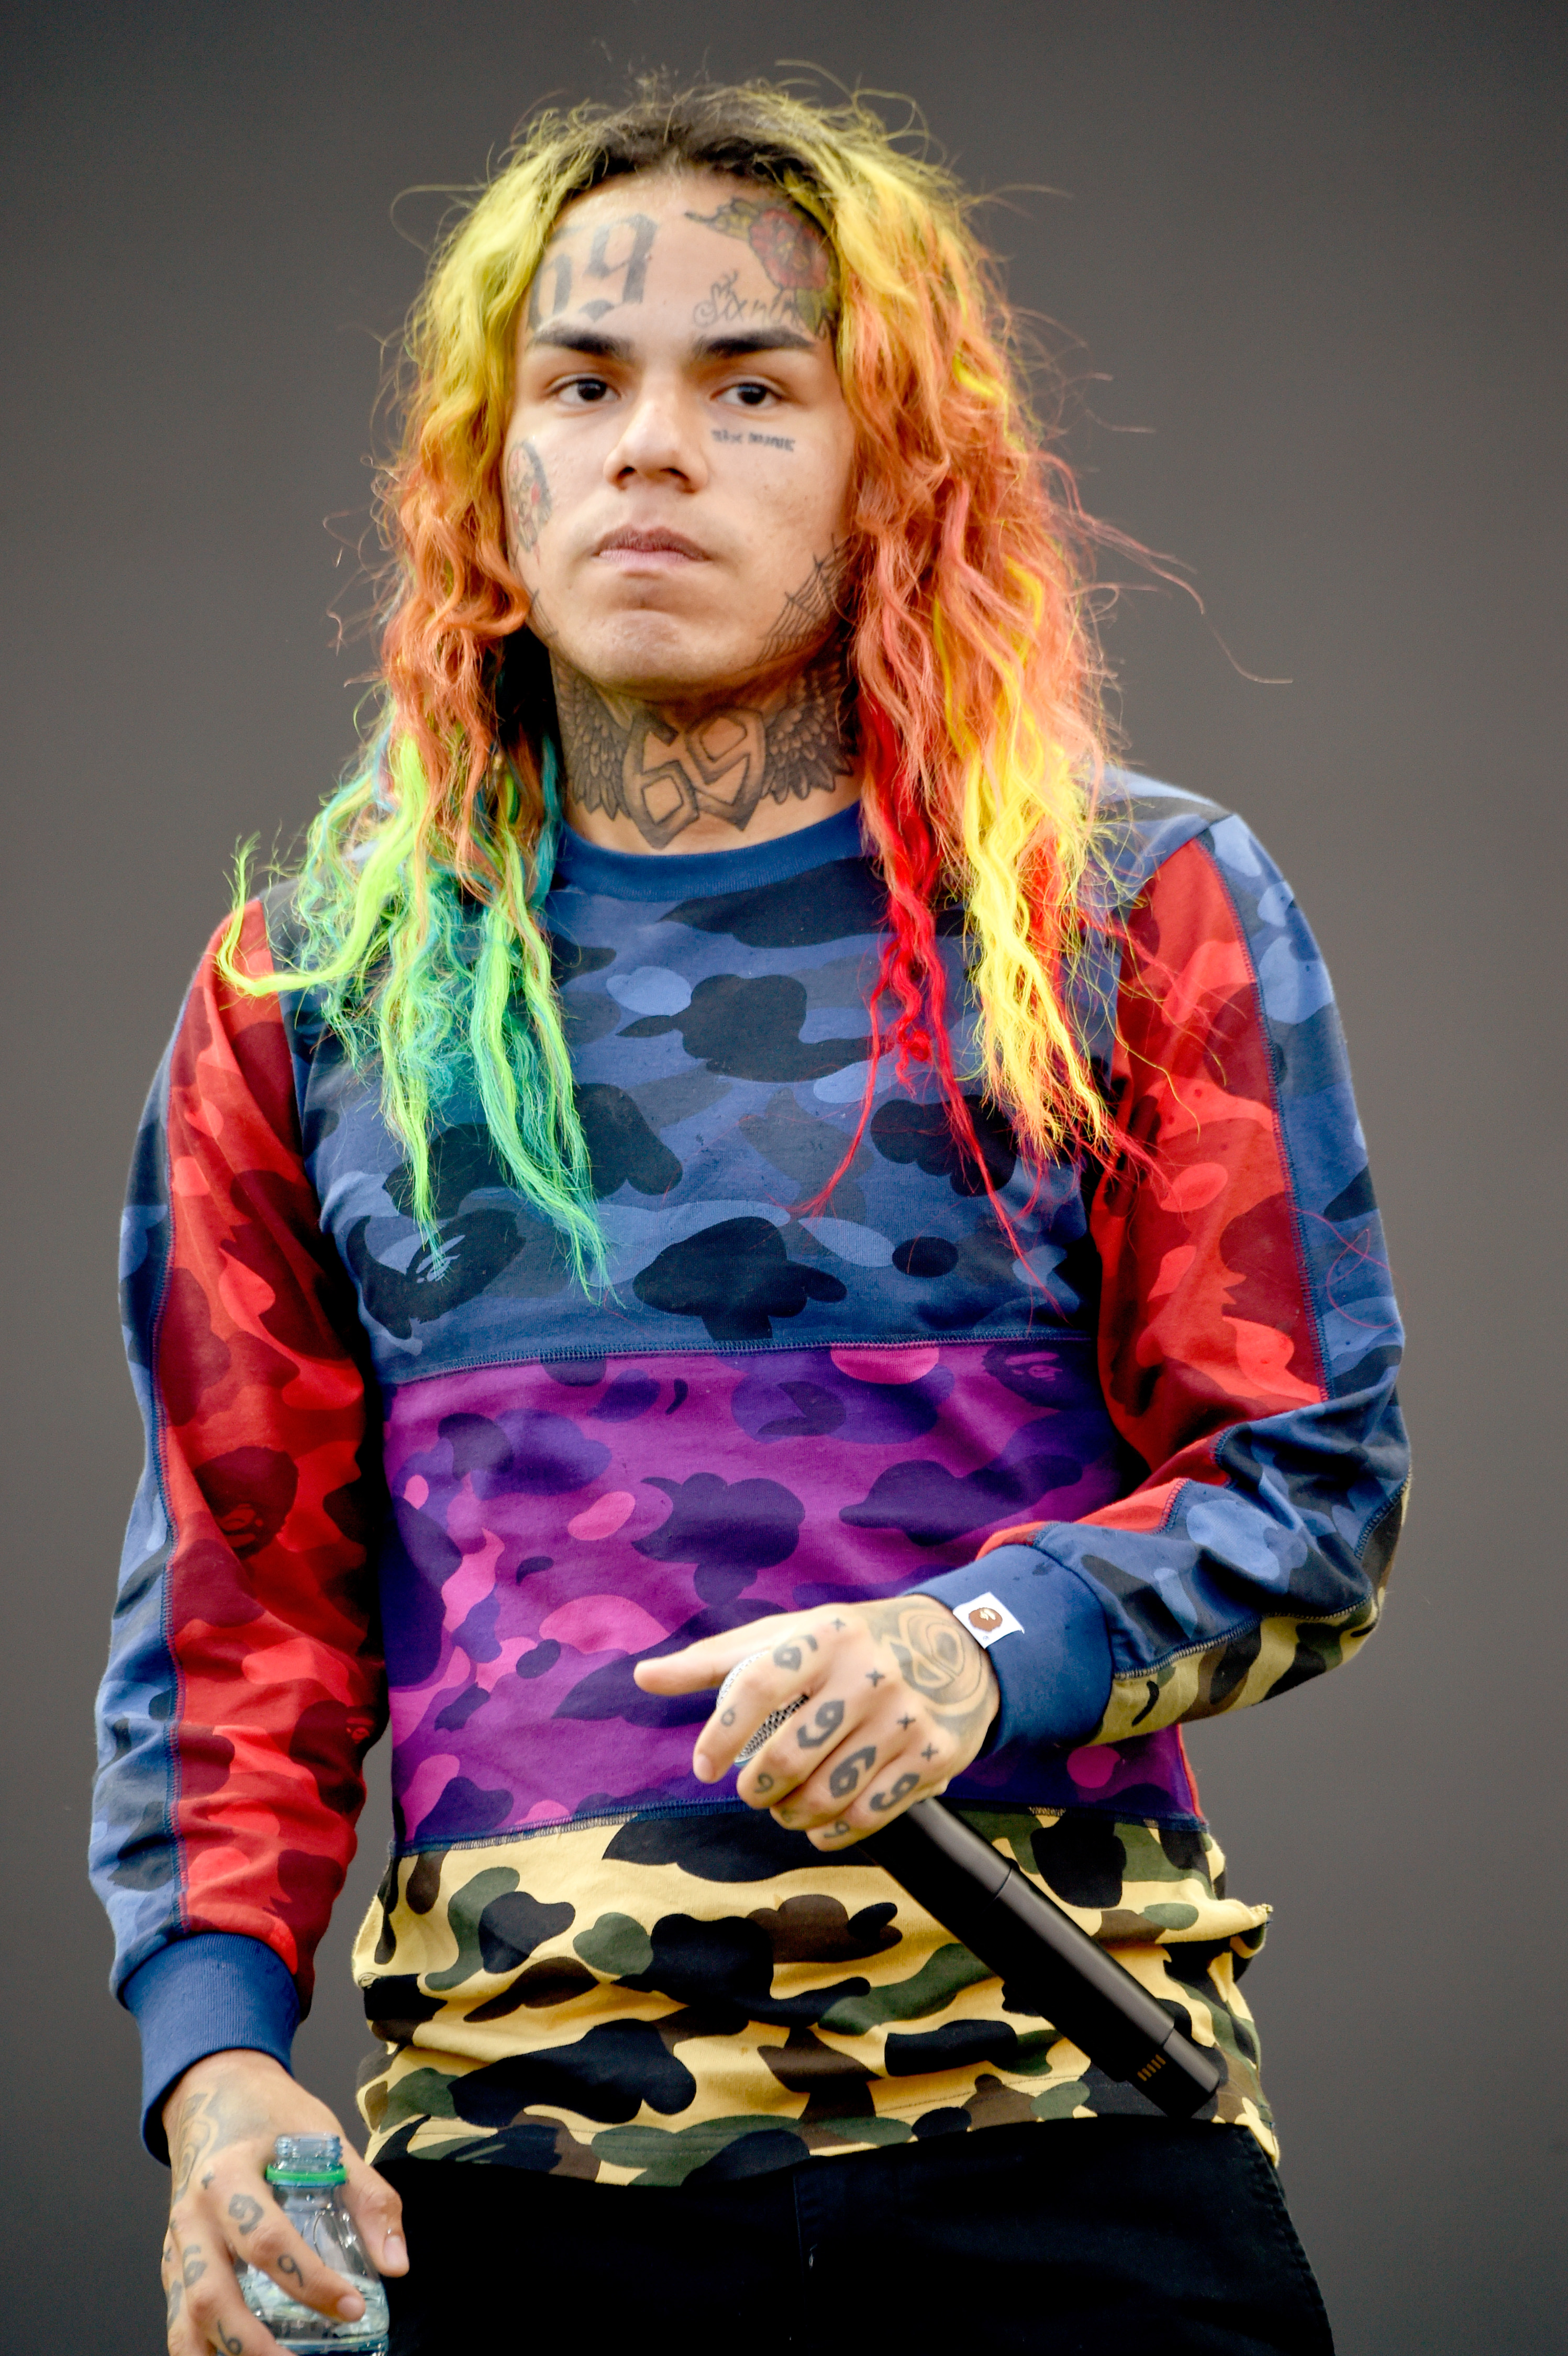 6ix9ine during the 2018 Made In America Festival - Day 1 at Benjamin Franklin Parkway on September 1, 2018, in Philadelphia, Pennsylvania. | Source: Getty Images